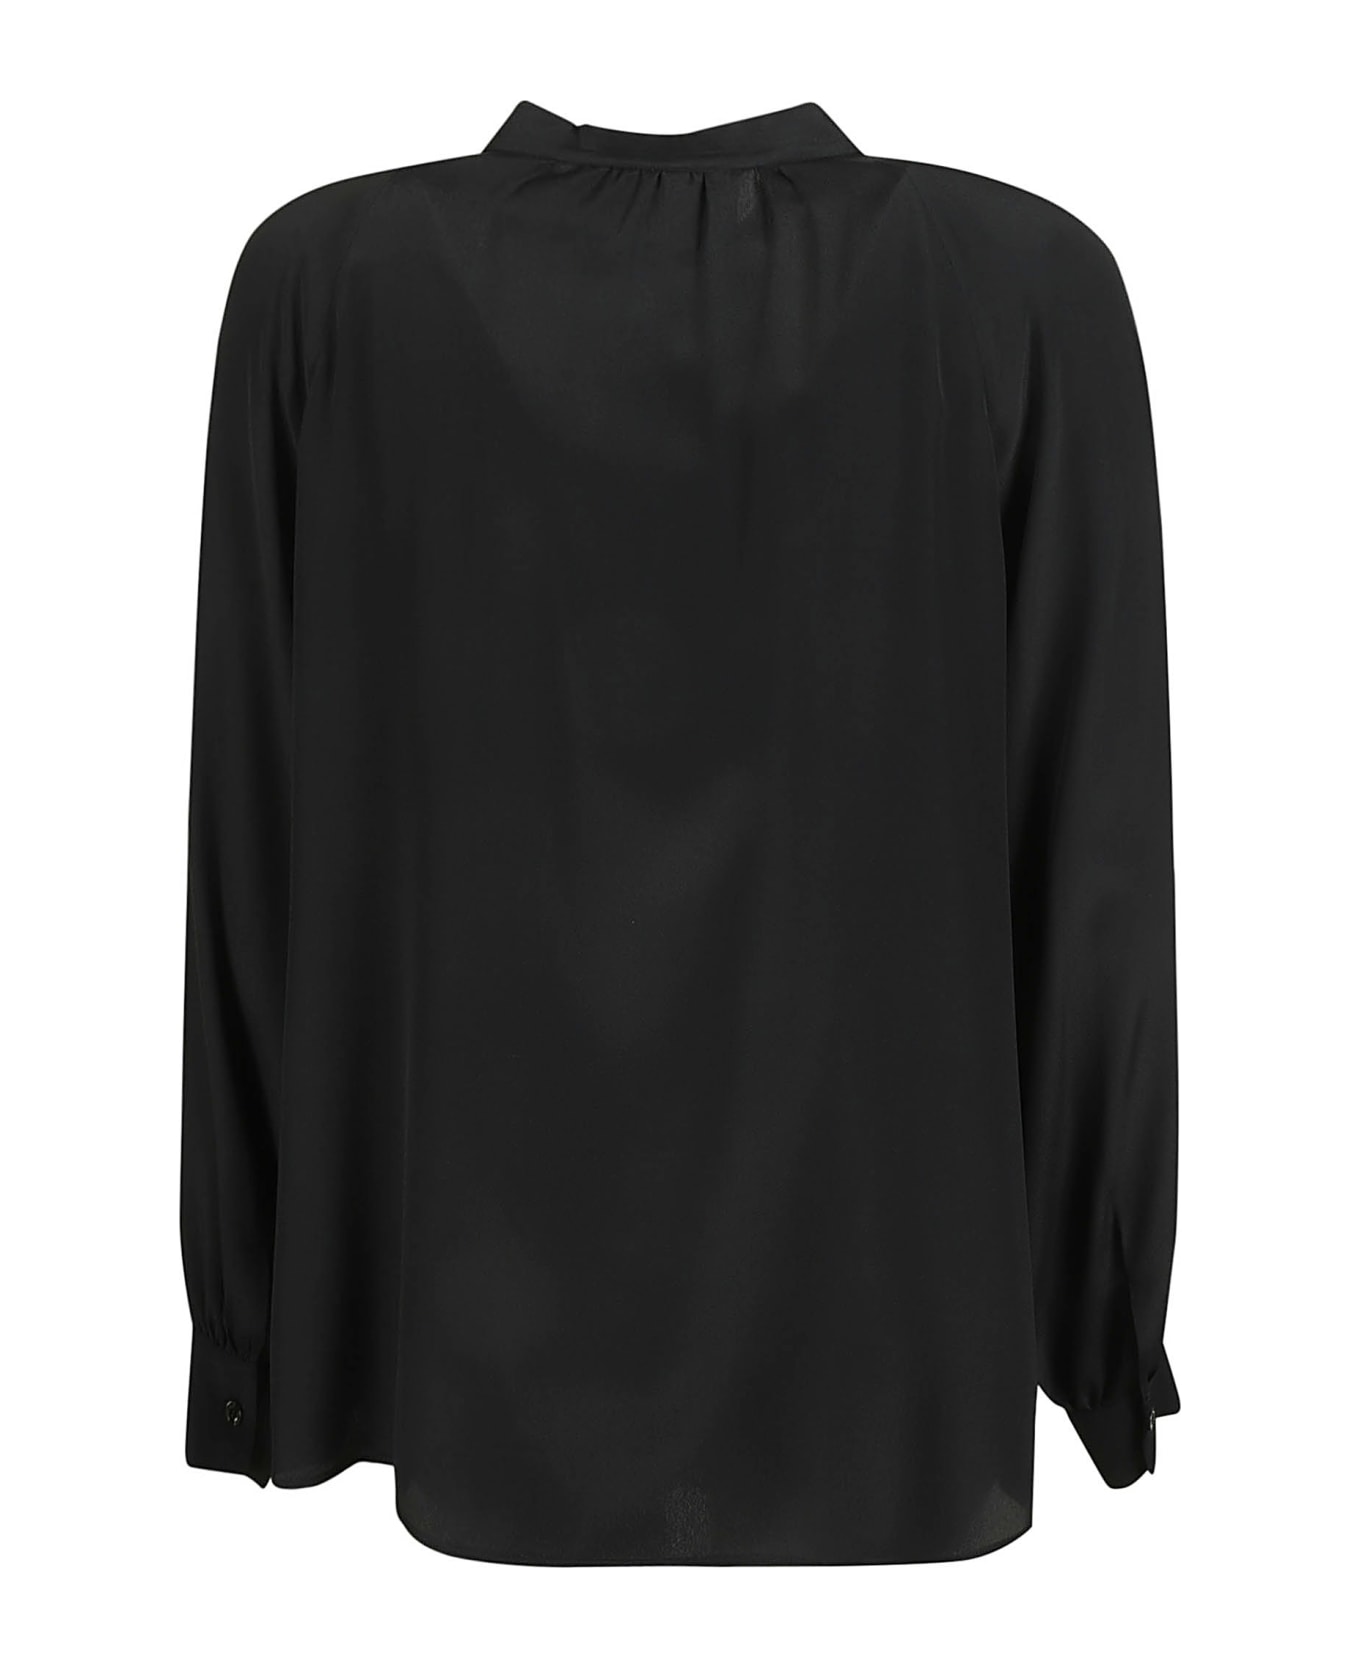 Boutique Moschino Buttoned Blouse - Black